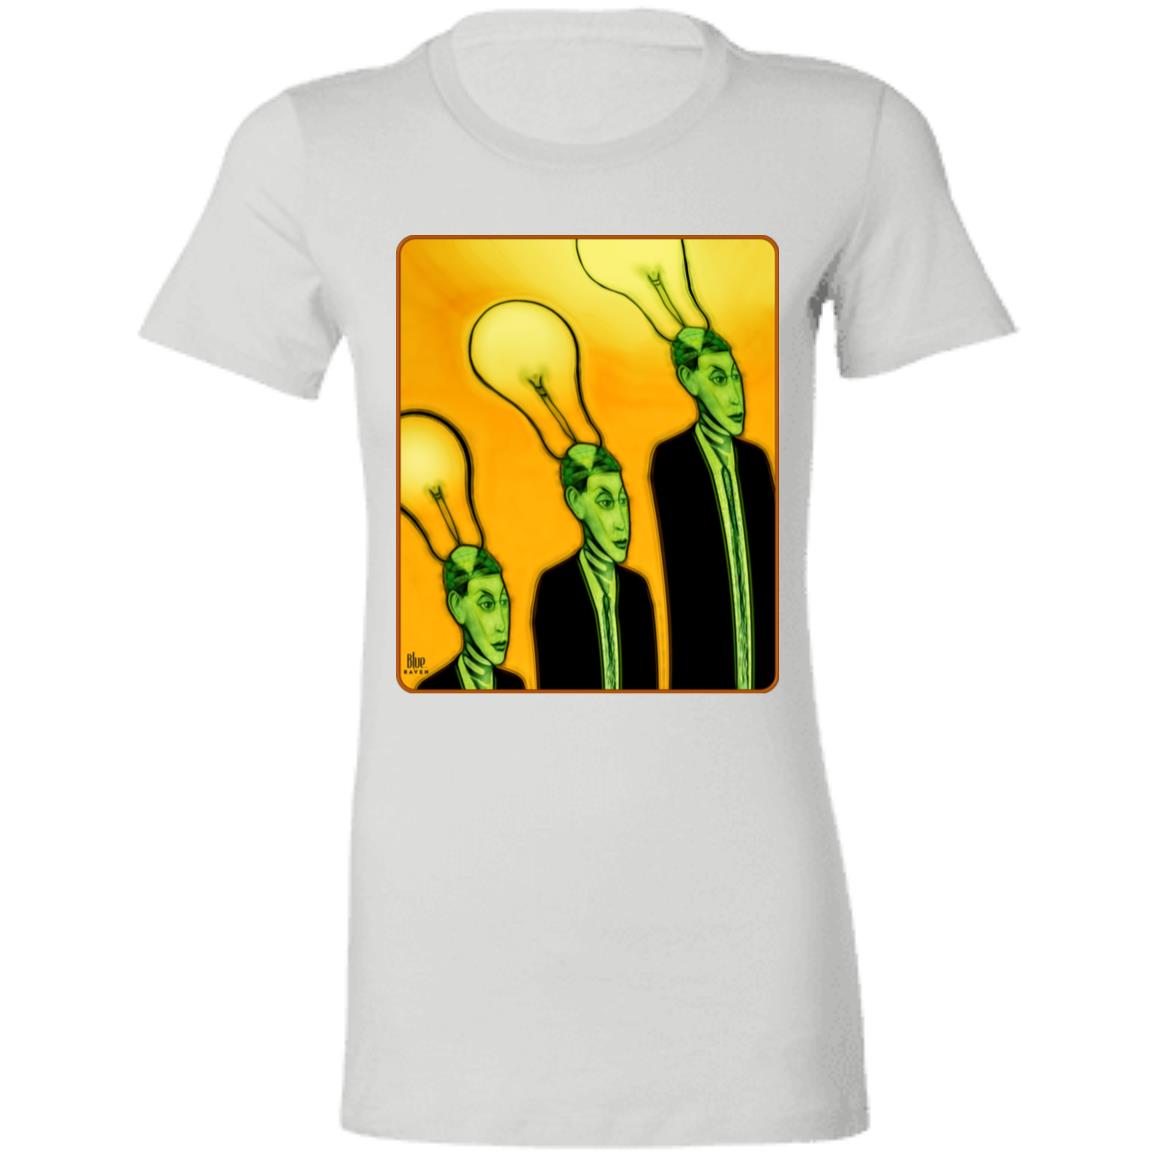 Brighter Idea -Women's Fitted T-Shirt